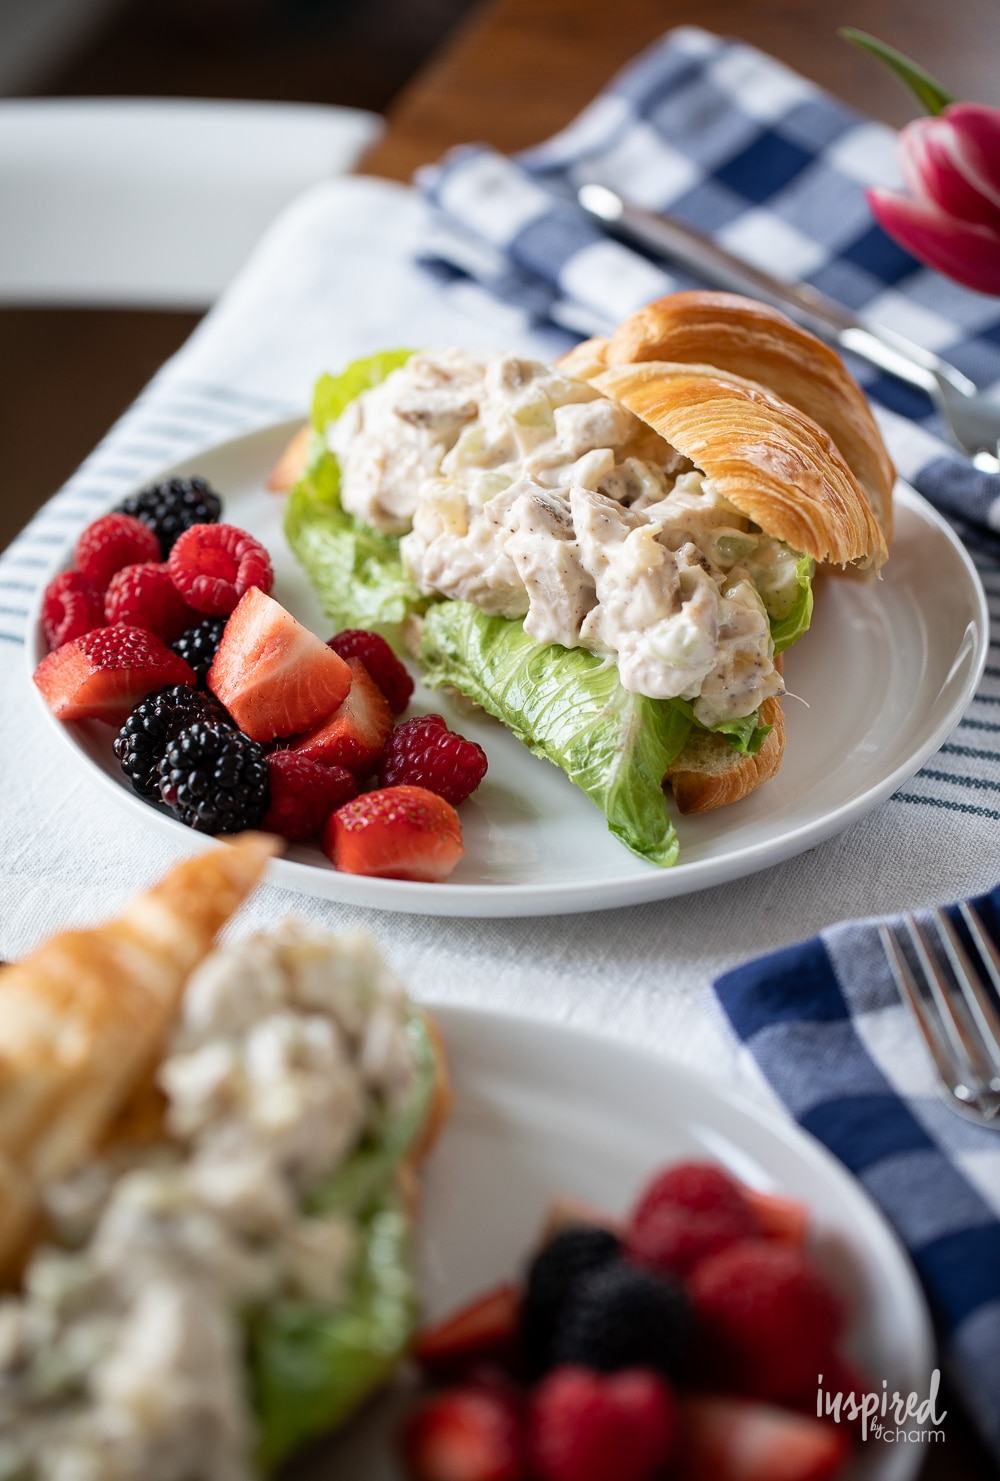 chicken salad sandwich on croissant with fruit.